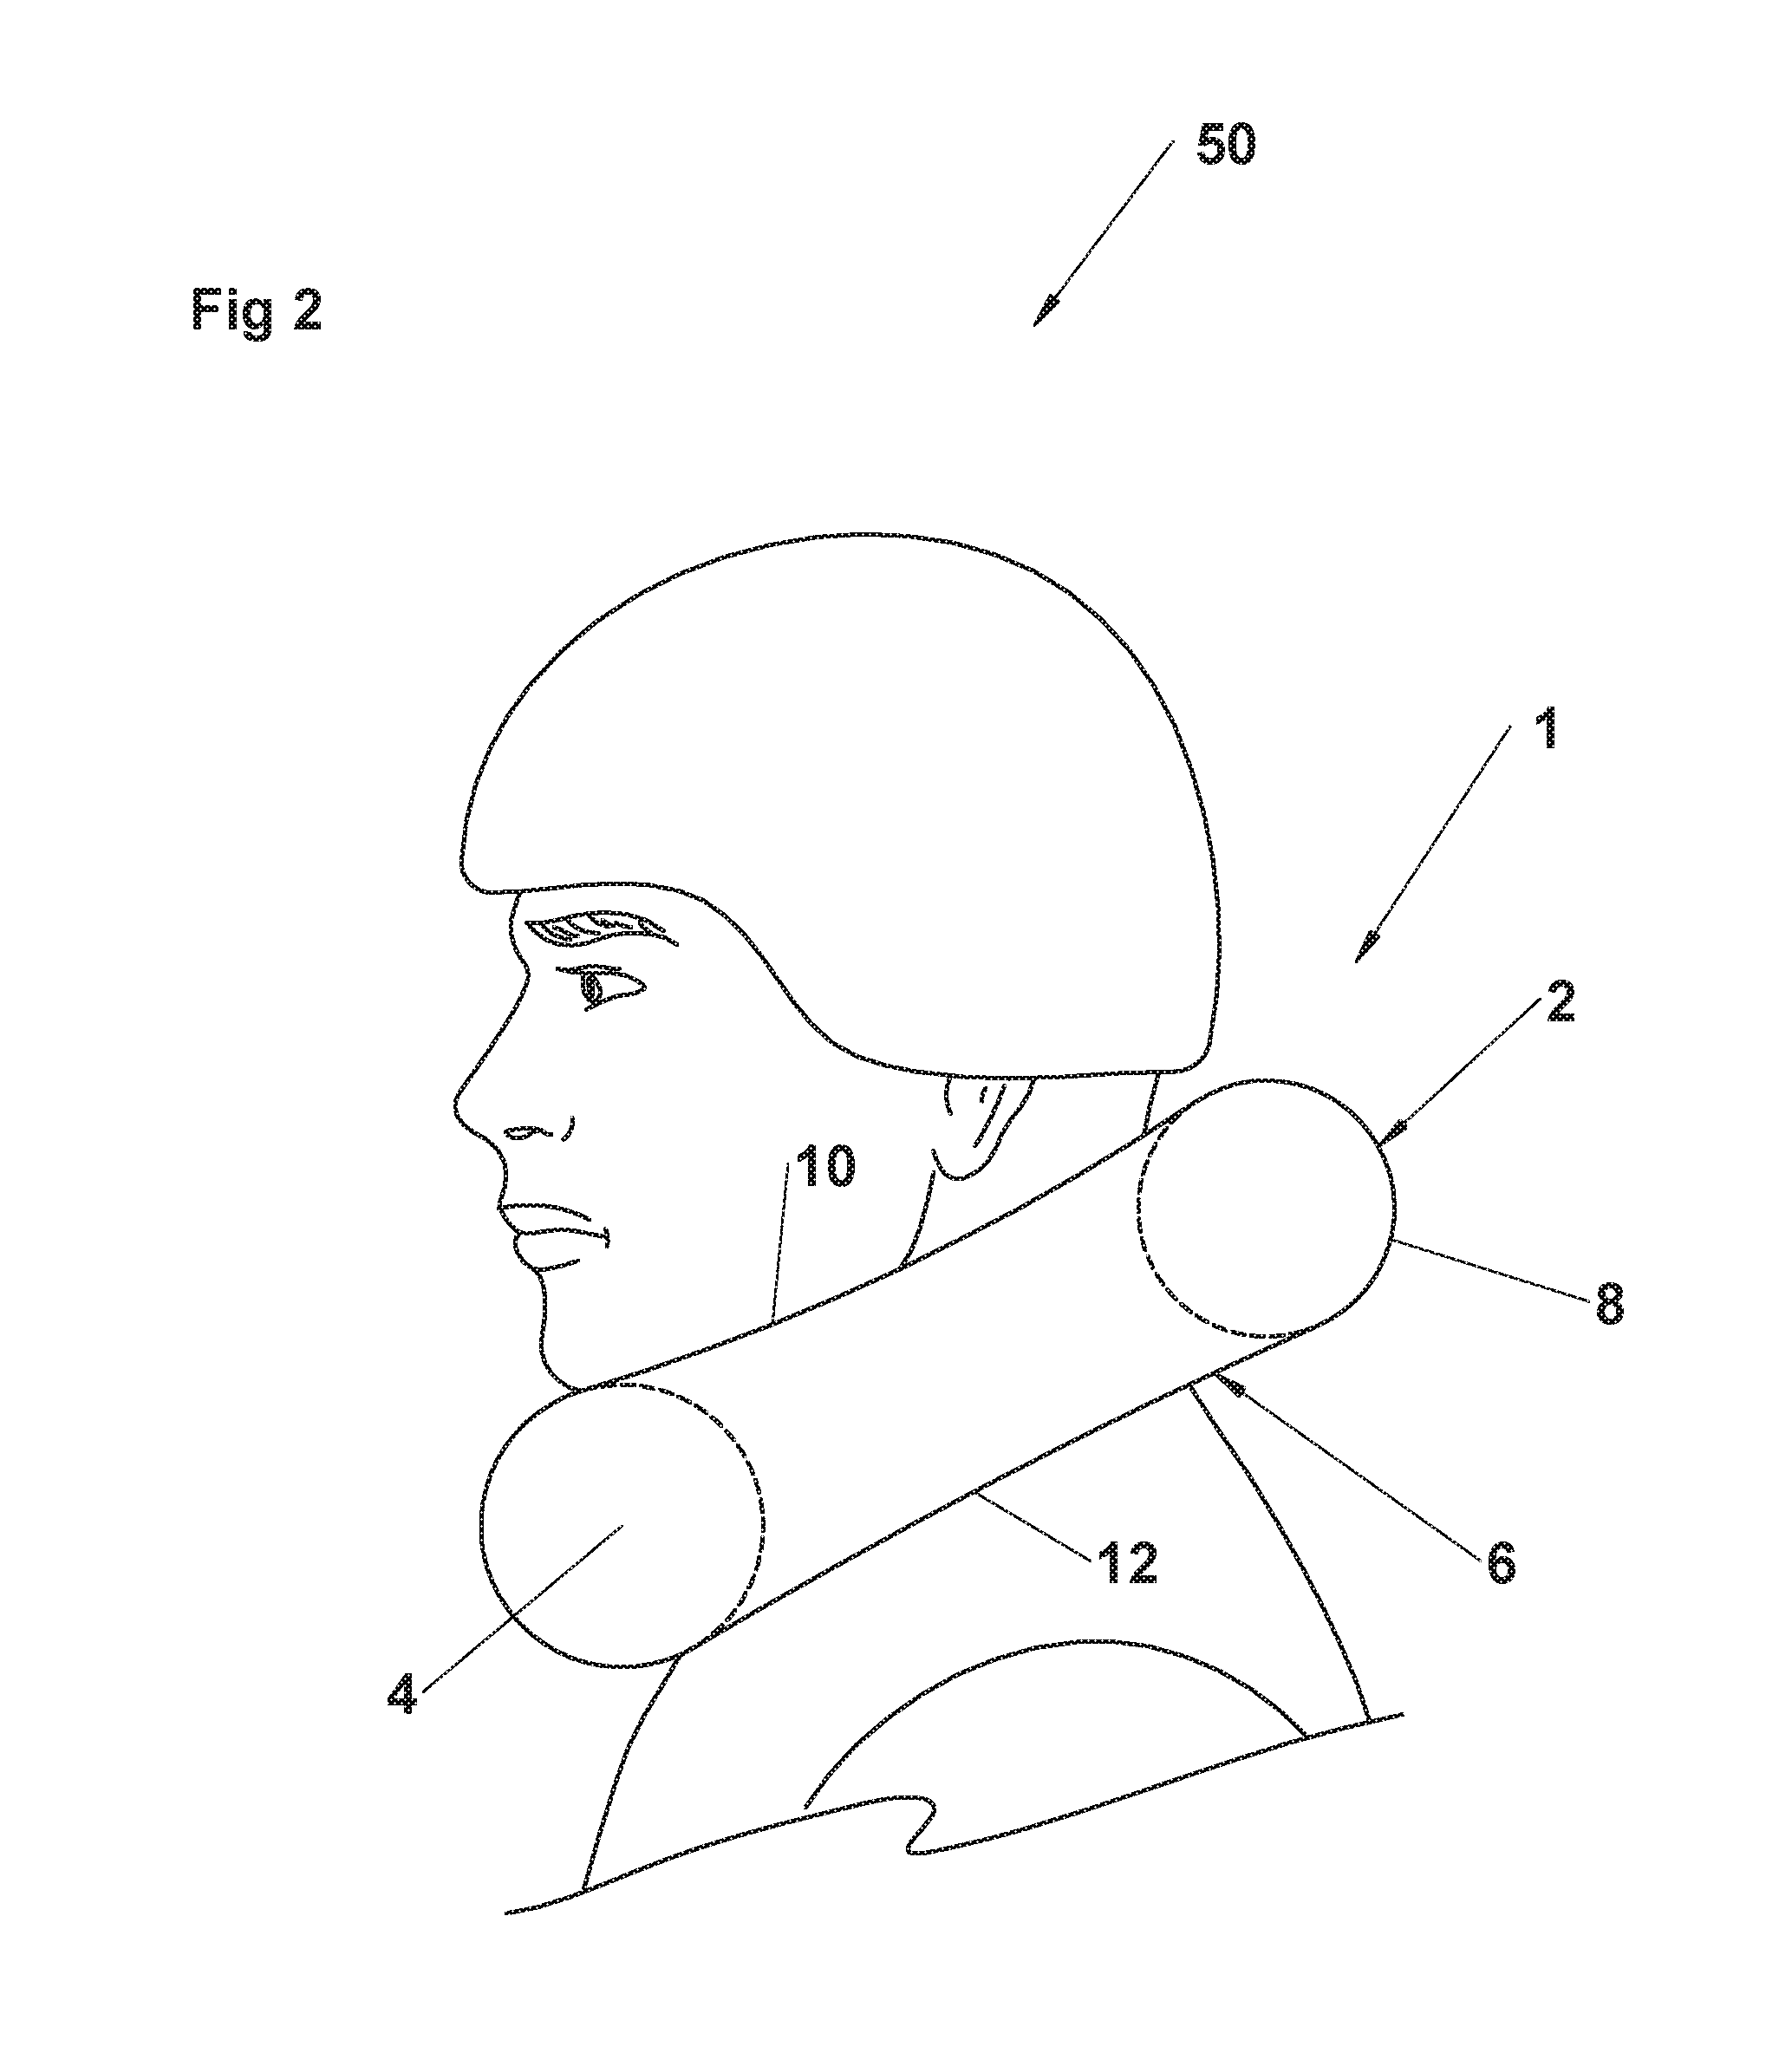 Inflatable blast-induced brain injury prevention device